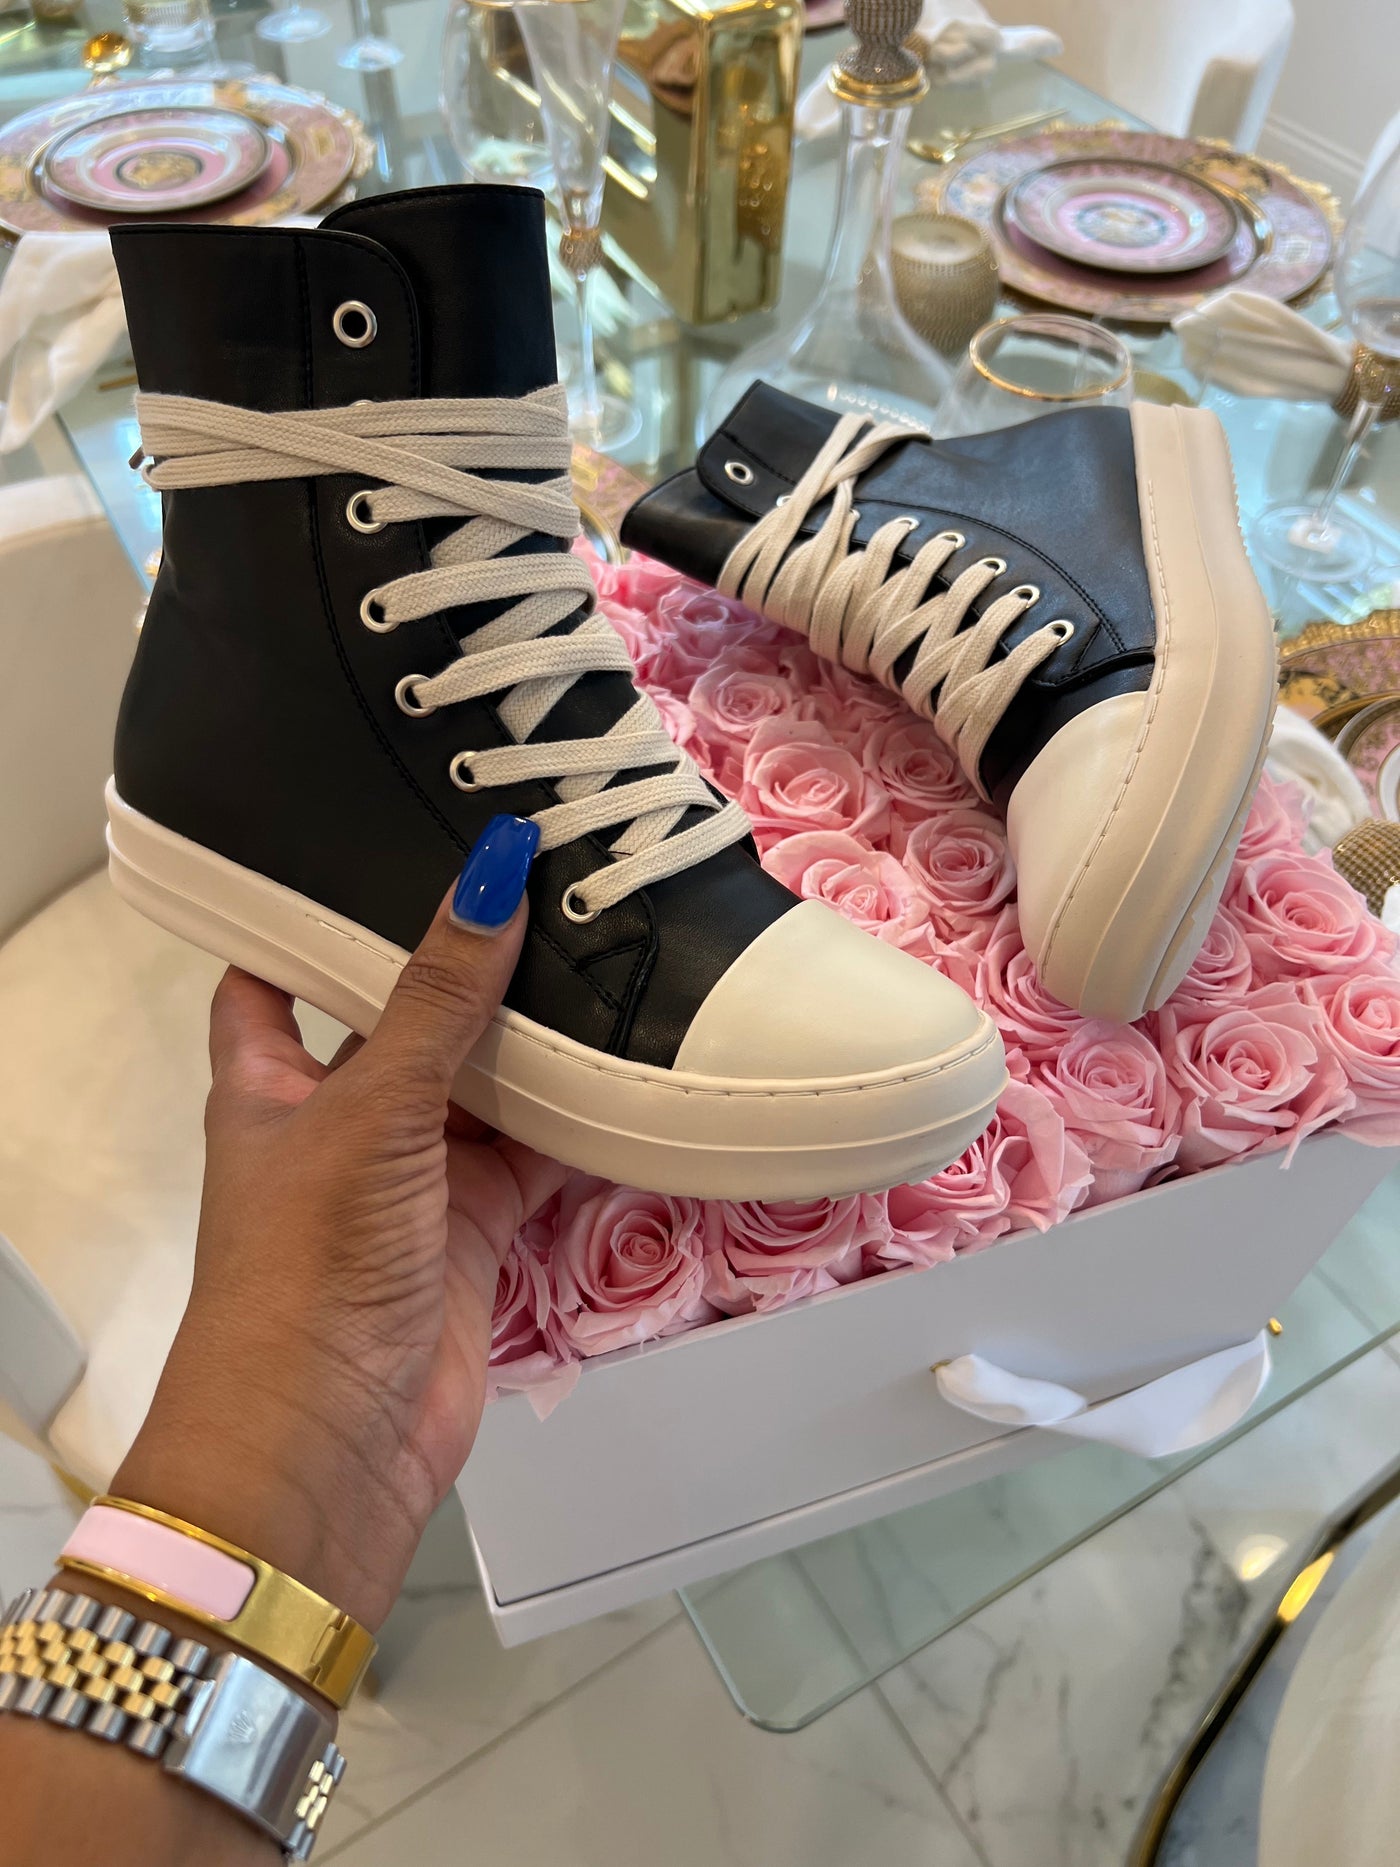 LEATHER SNEAKERS PRE-ORDER SHIPS 14-21 BUSINESS DAYS